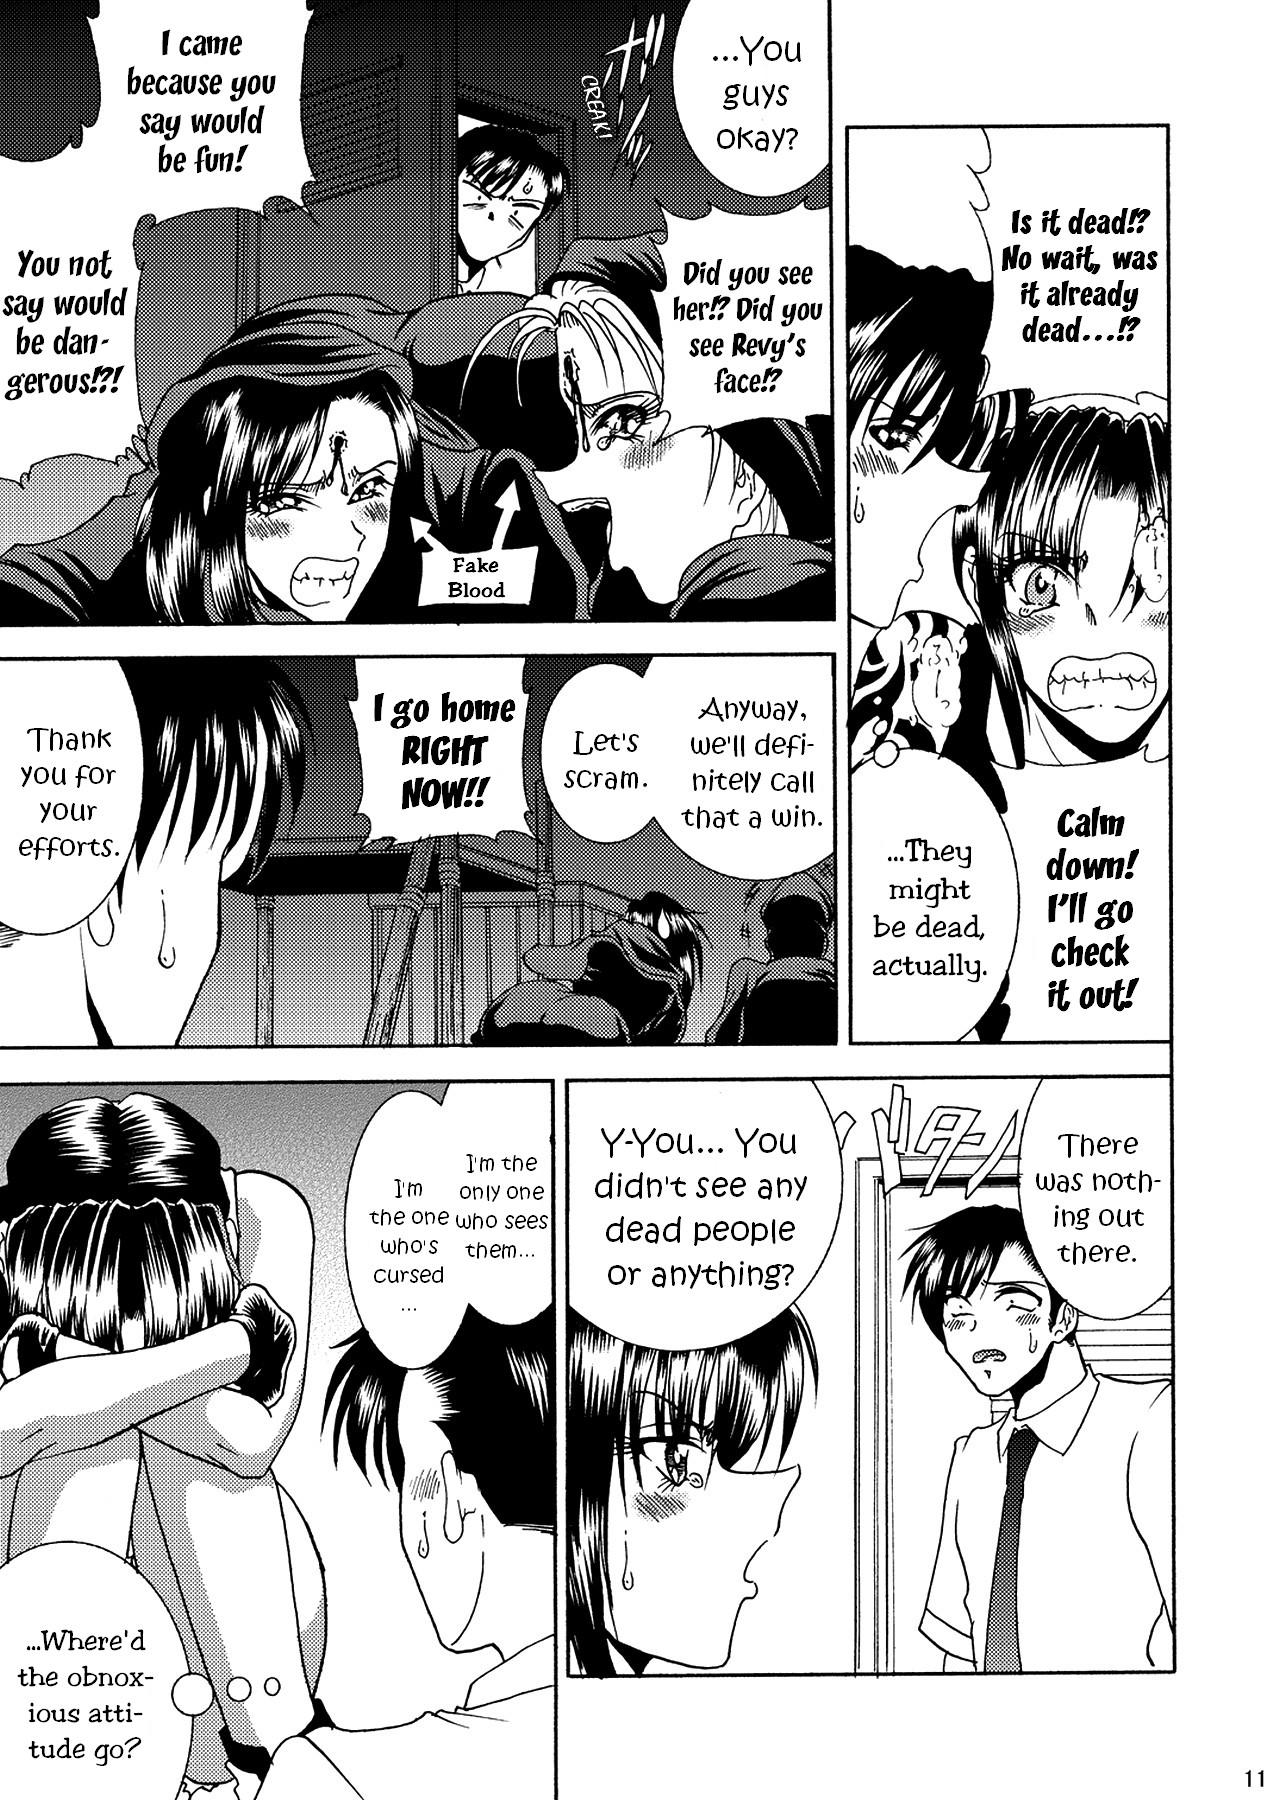 Cfnm ZONE 51 Dead Man's Folly - Black lagoon Brother - Page 10